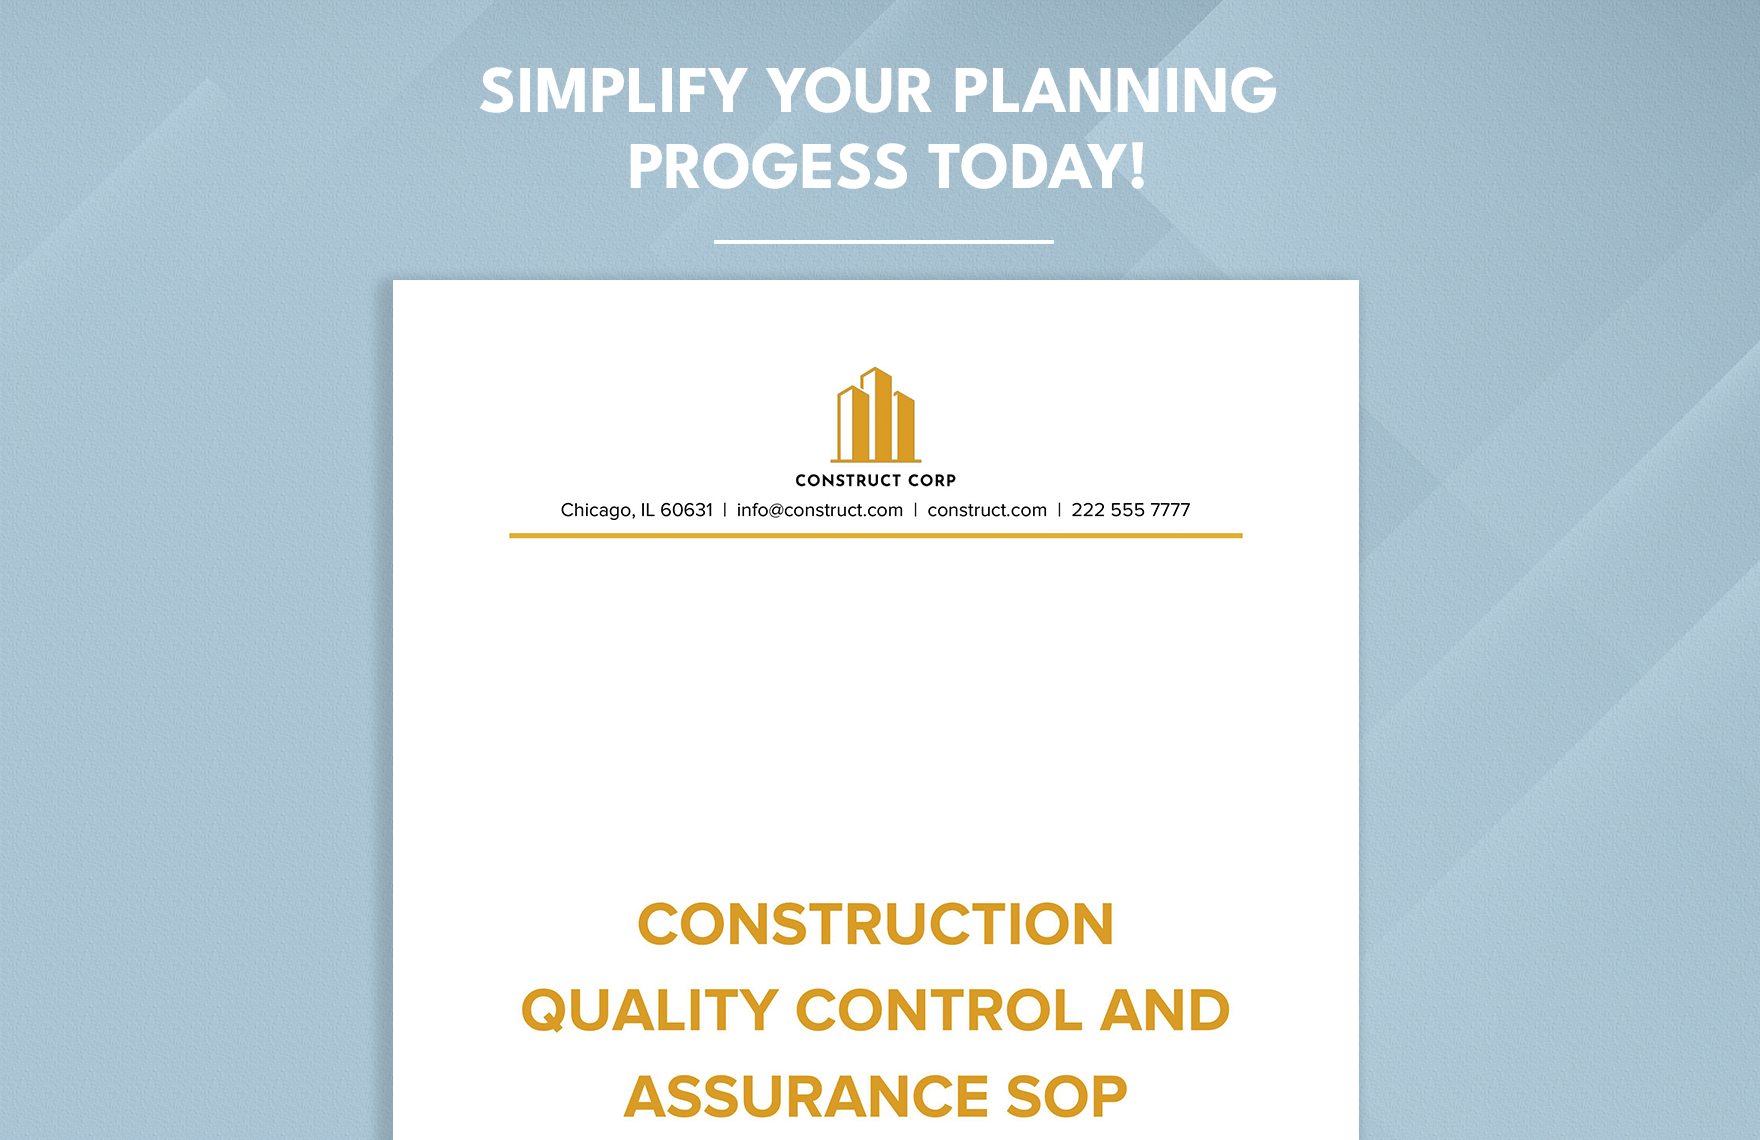 Construction Quality Control and Assurance SOP